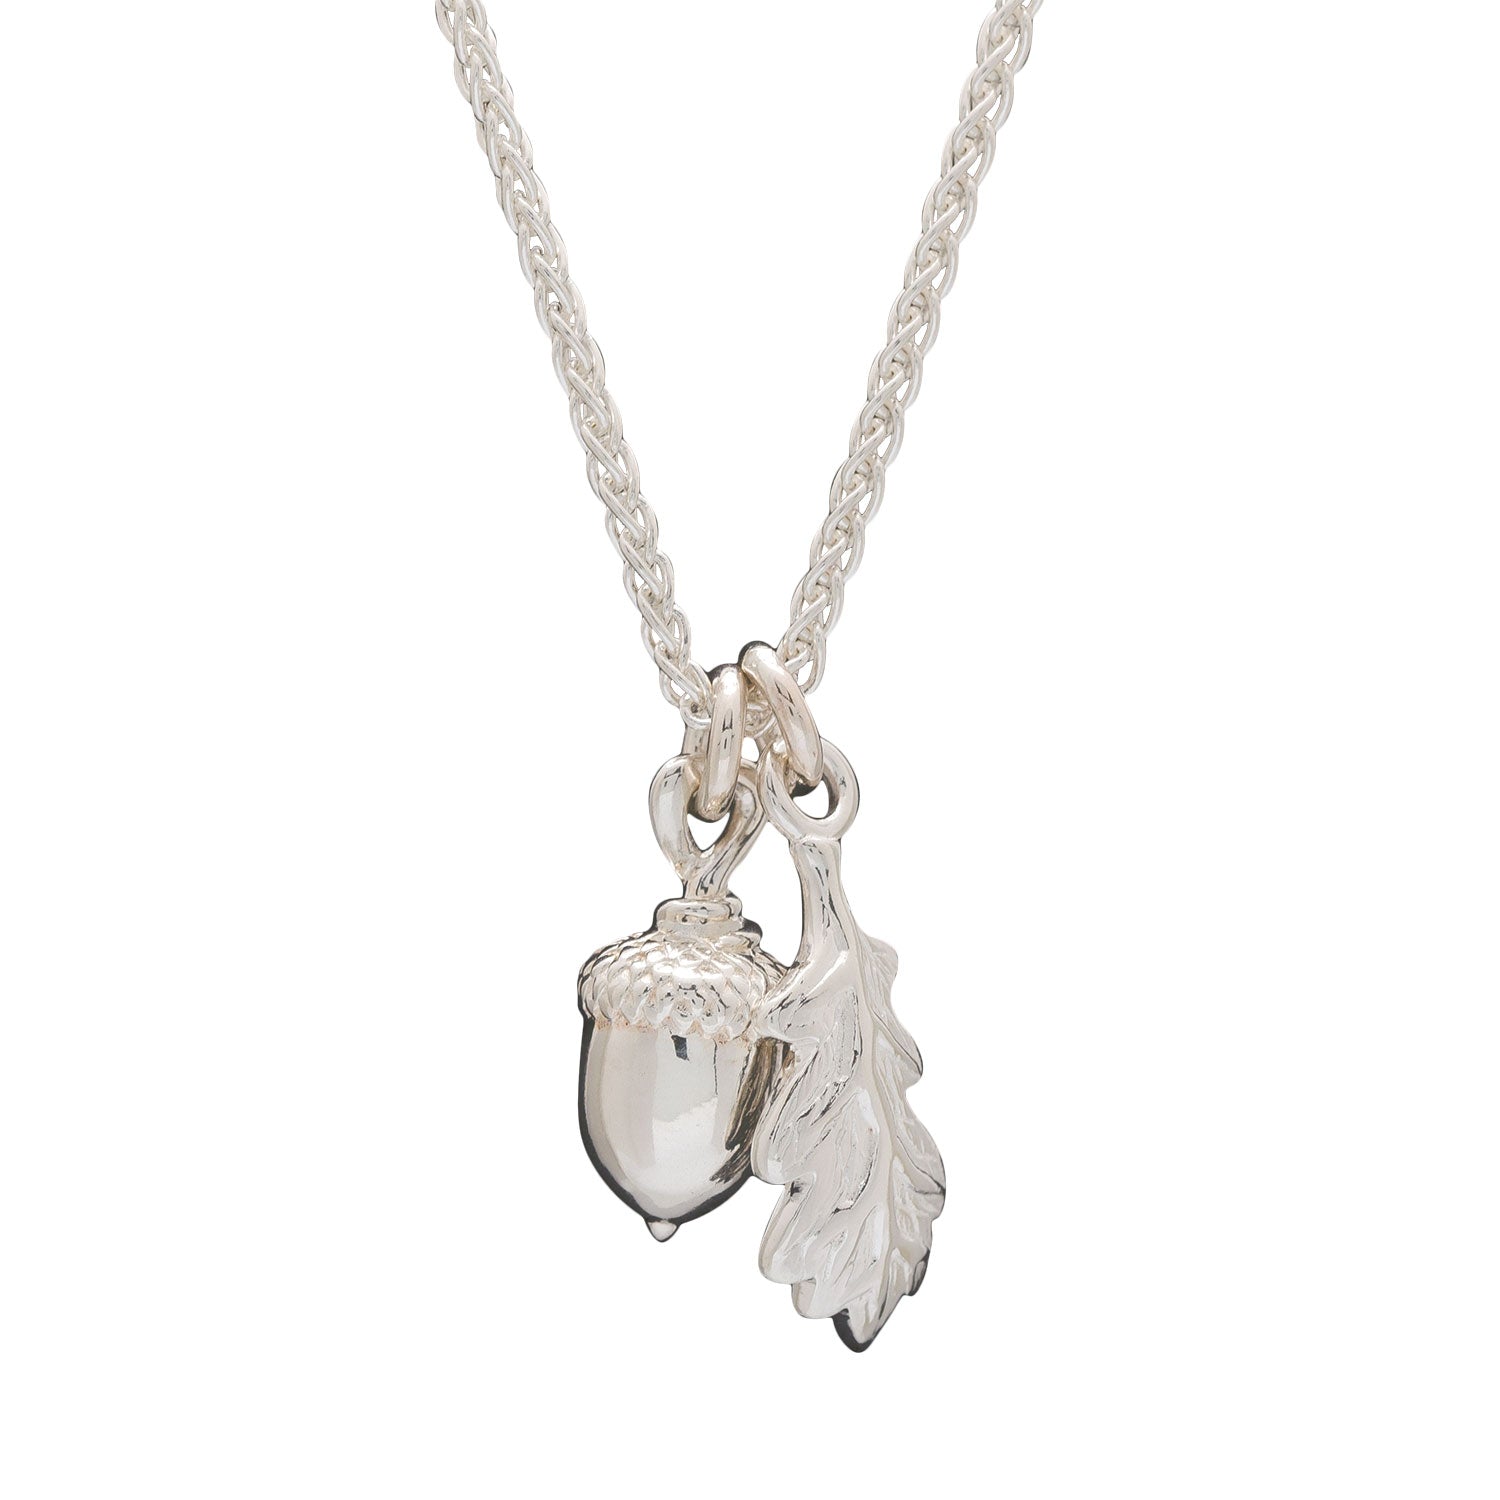 Scarlett Jewellery Solid Silver Acorn and Oak Leaf Necklace - Nature-Inspired Elegance with Expert Craftsmanship